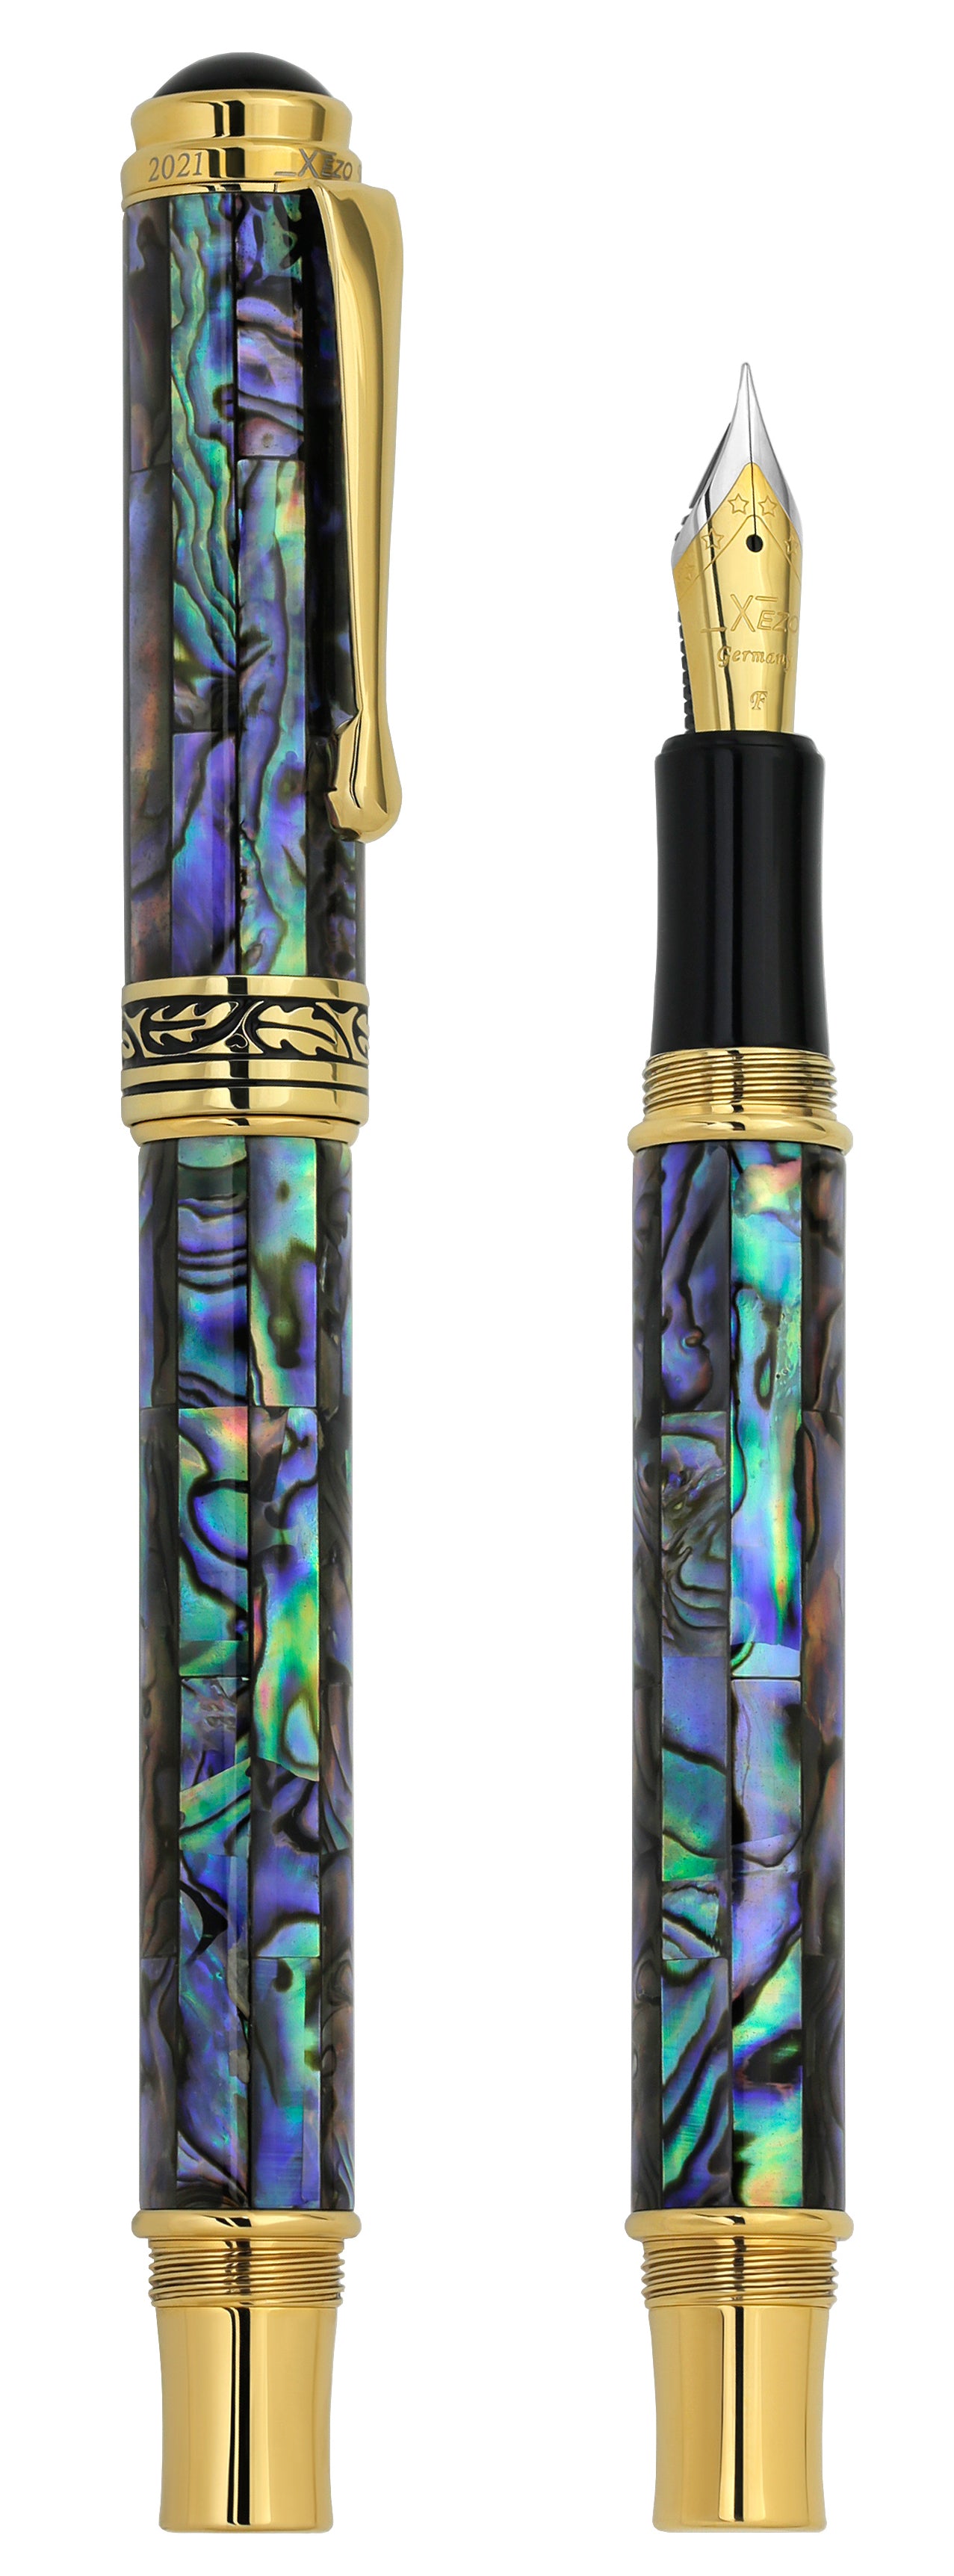 Xezo - Vertical view of two Maestro Sea Shell FPG-1 fountain pens. The pen on the left is capped, and the pen on the right has no cap